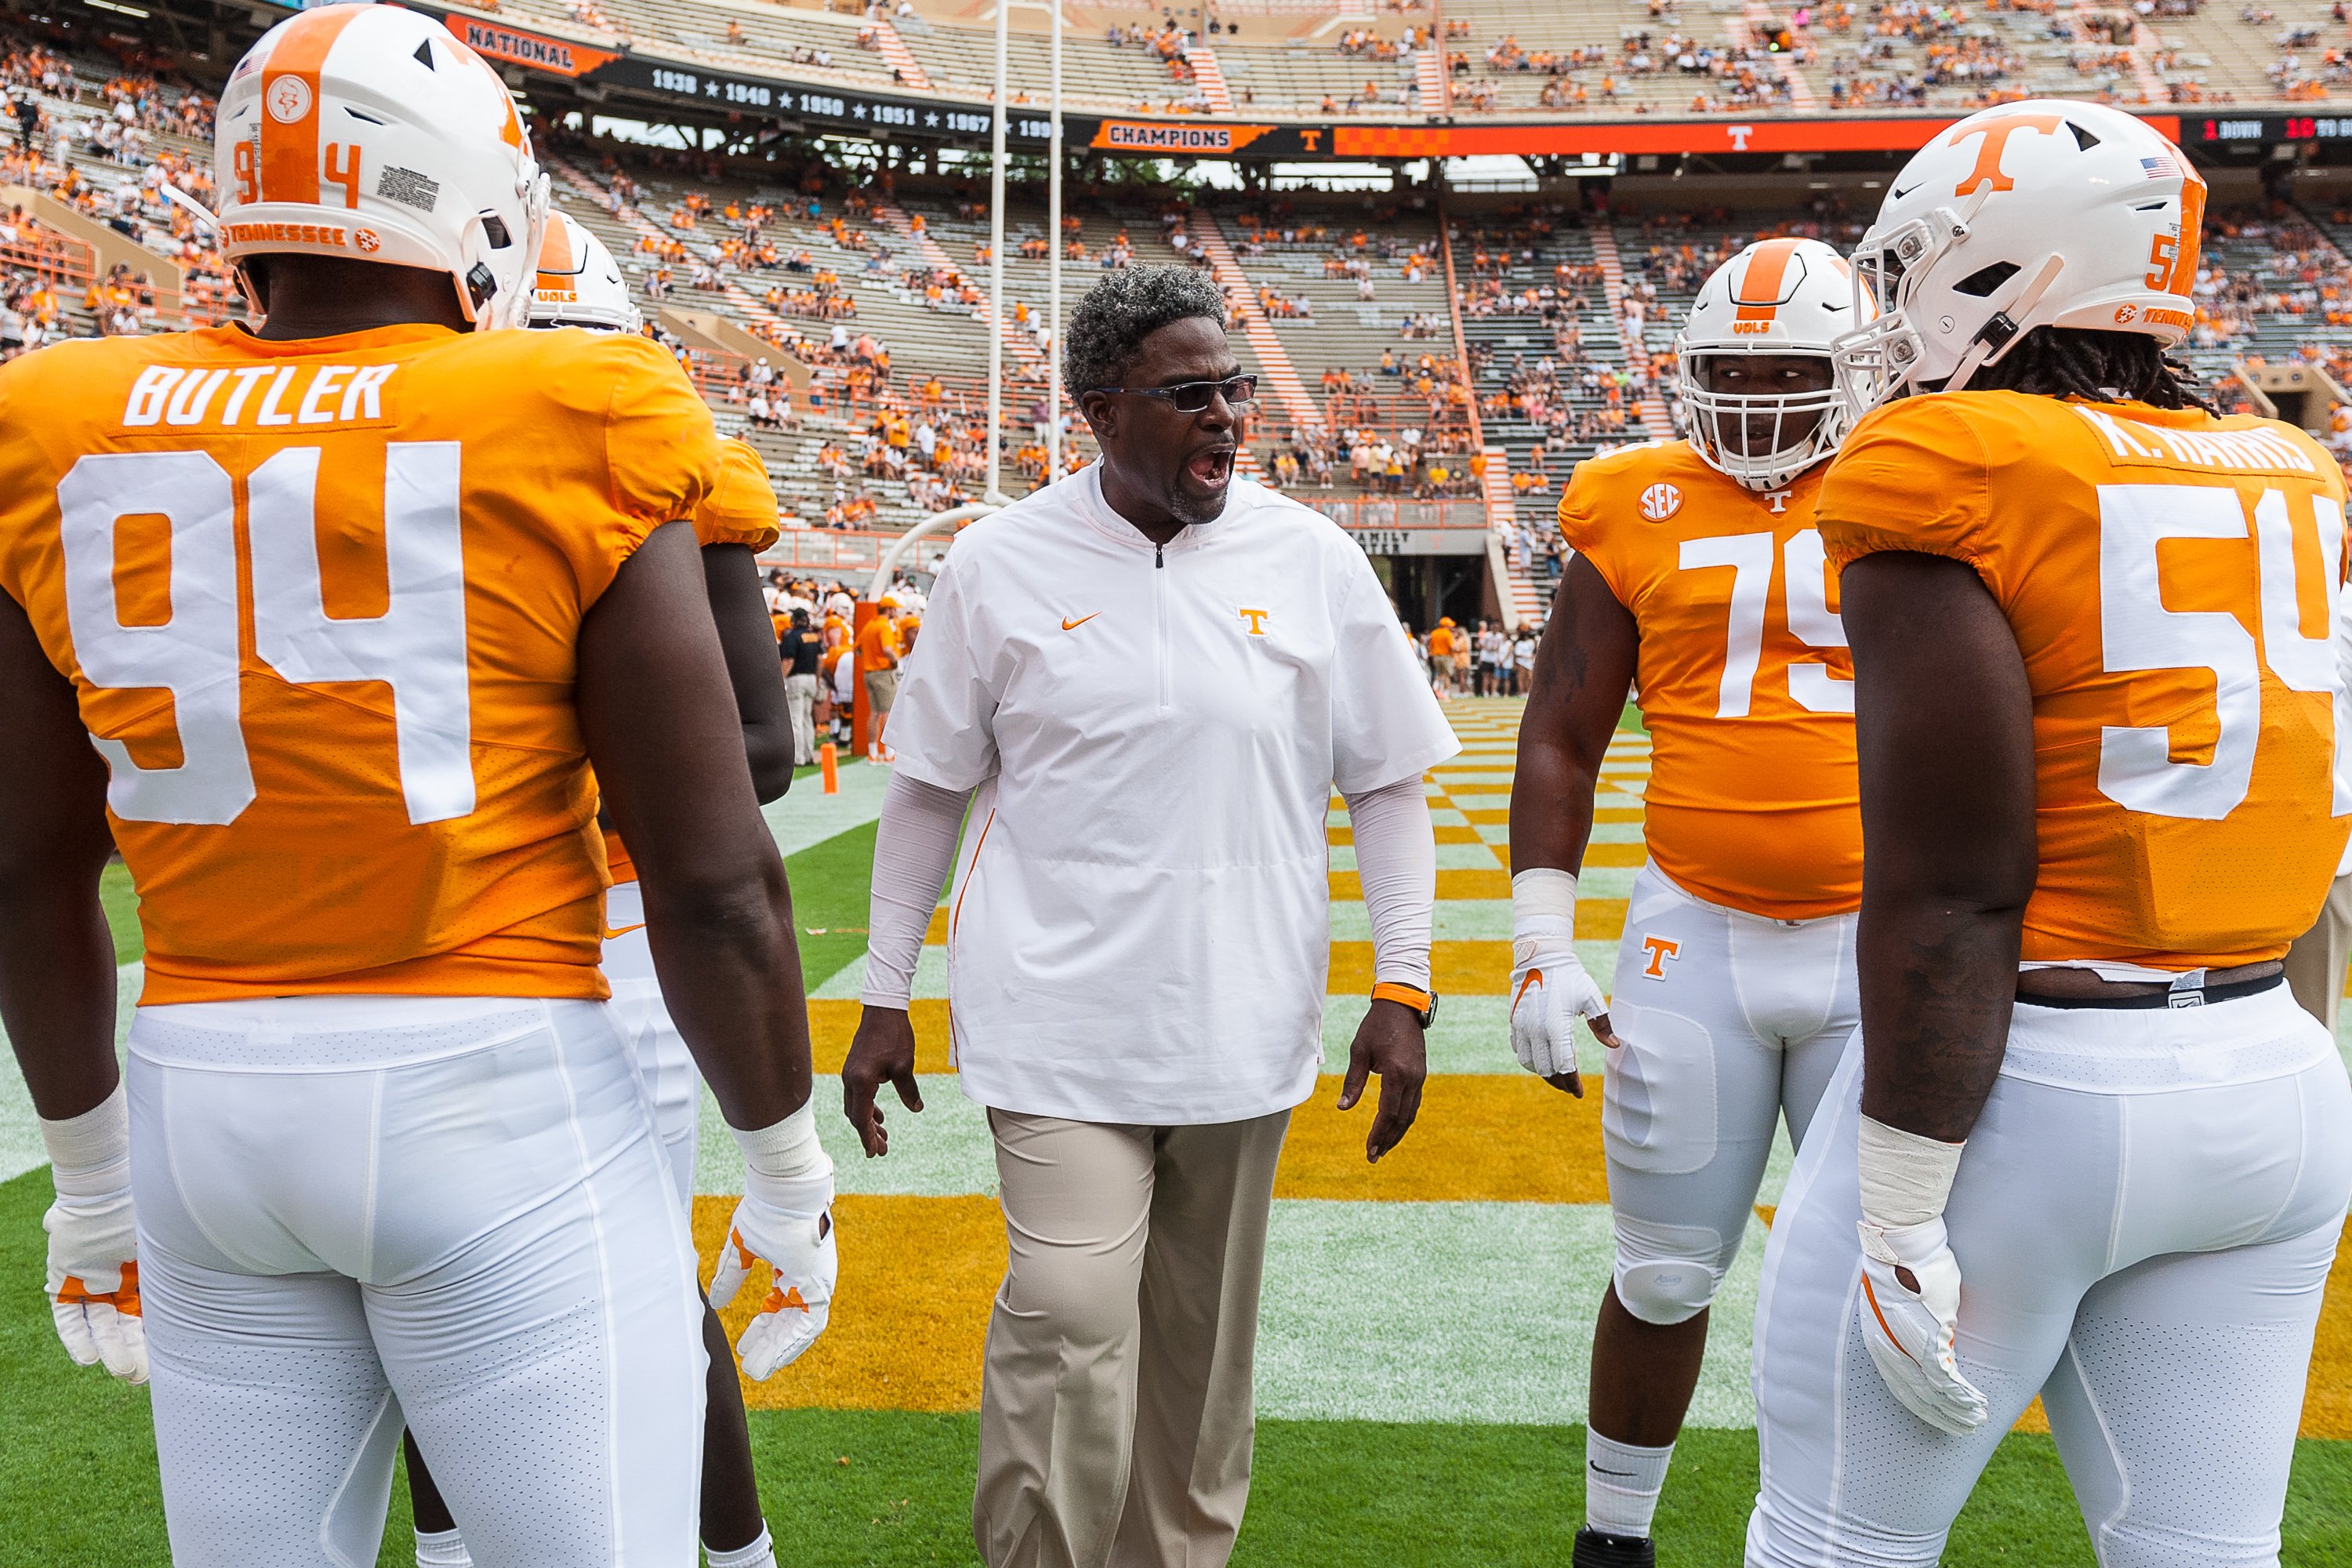 Tennessee Volunteers defensive line coach Tracy Rocker coaching during a college football game between the Tennessee Volunteers and Chattanooga Mocs on September 14, 2019. | Source: Getty Images